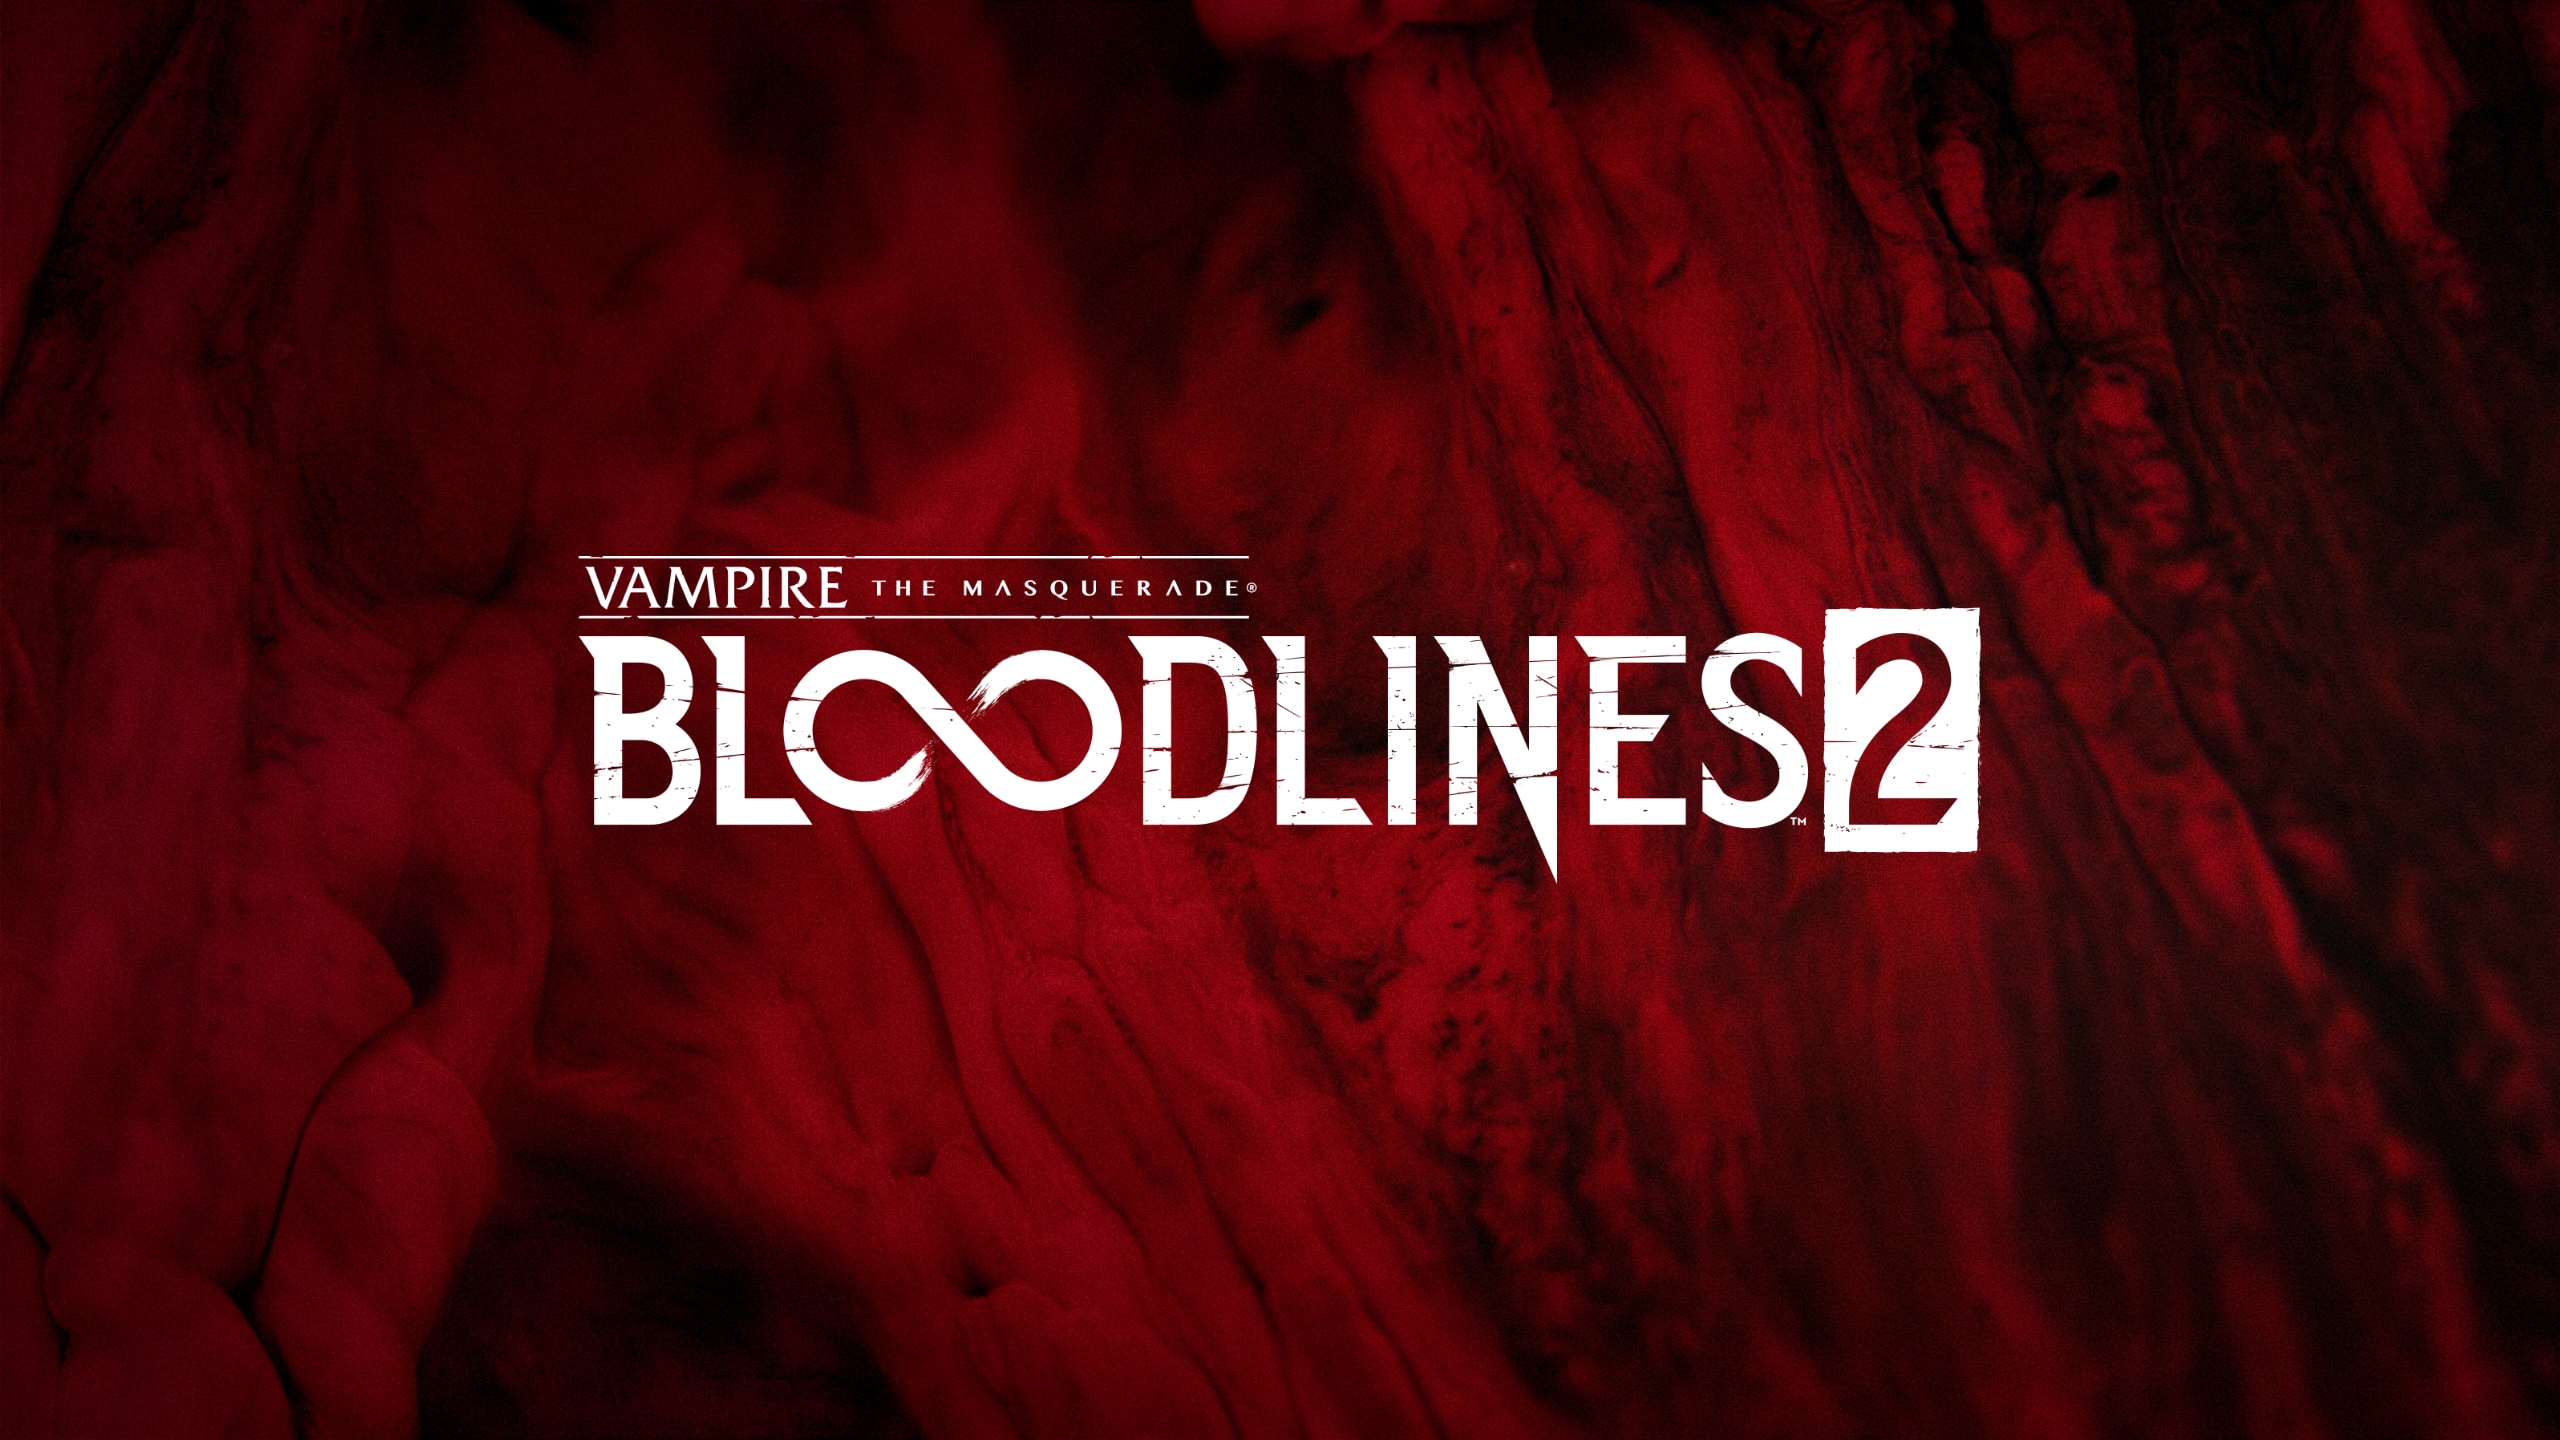 Vampire: The Masquerade – Bloodlines -Lets play it again with mods!